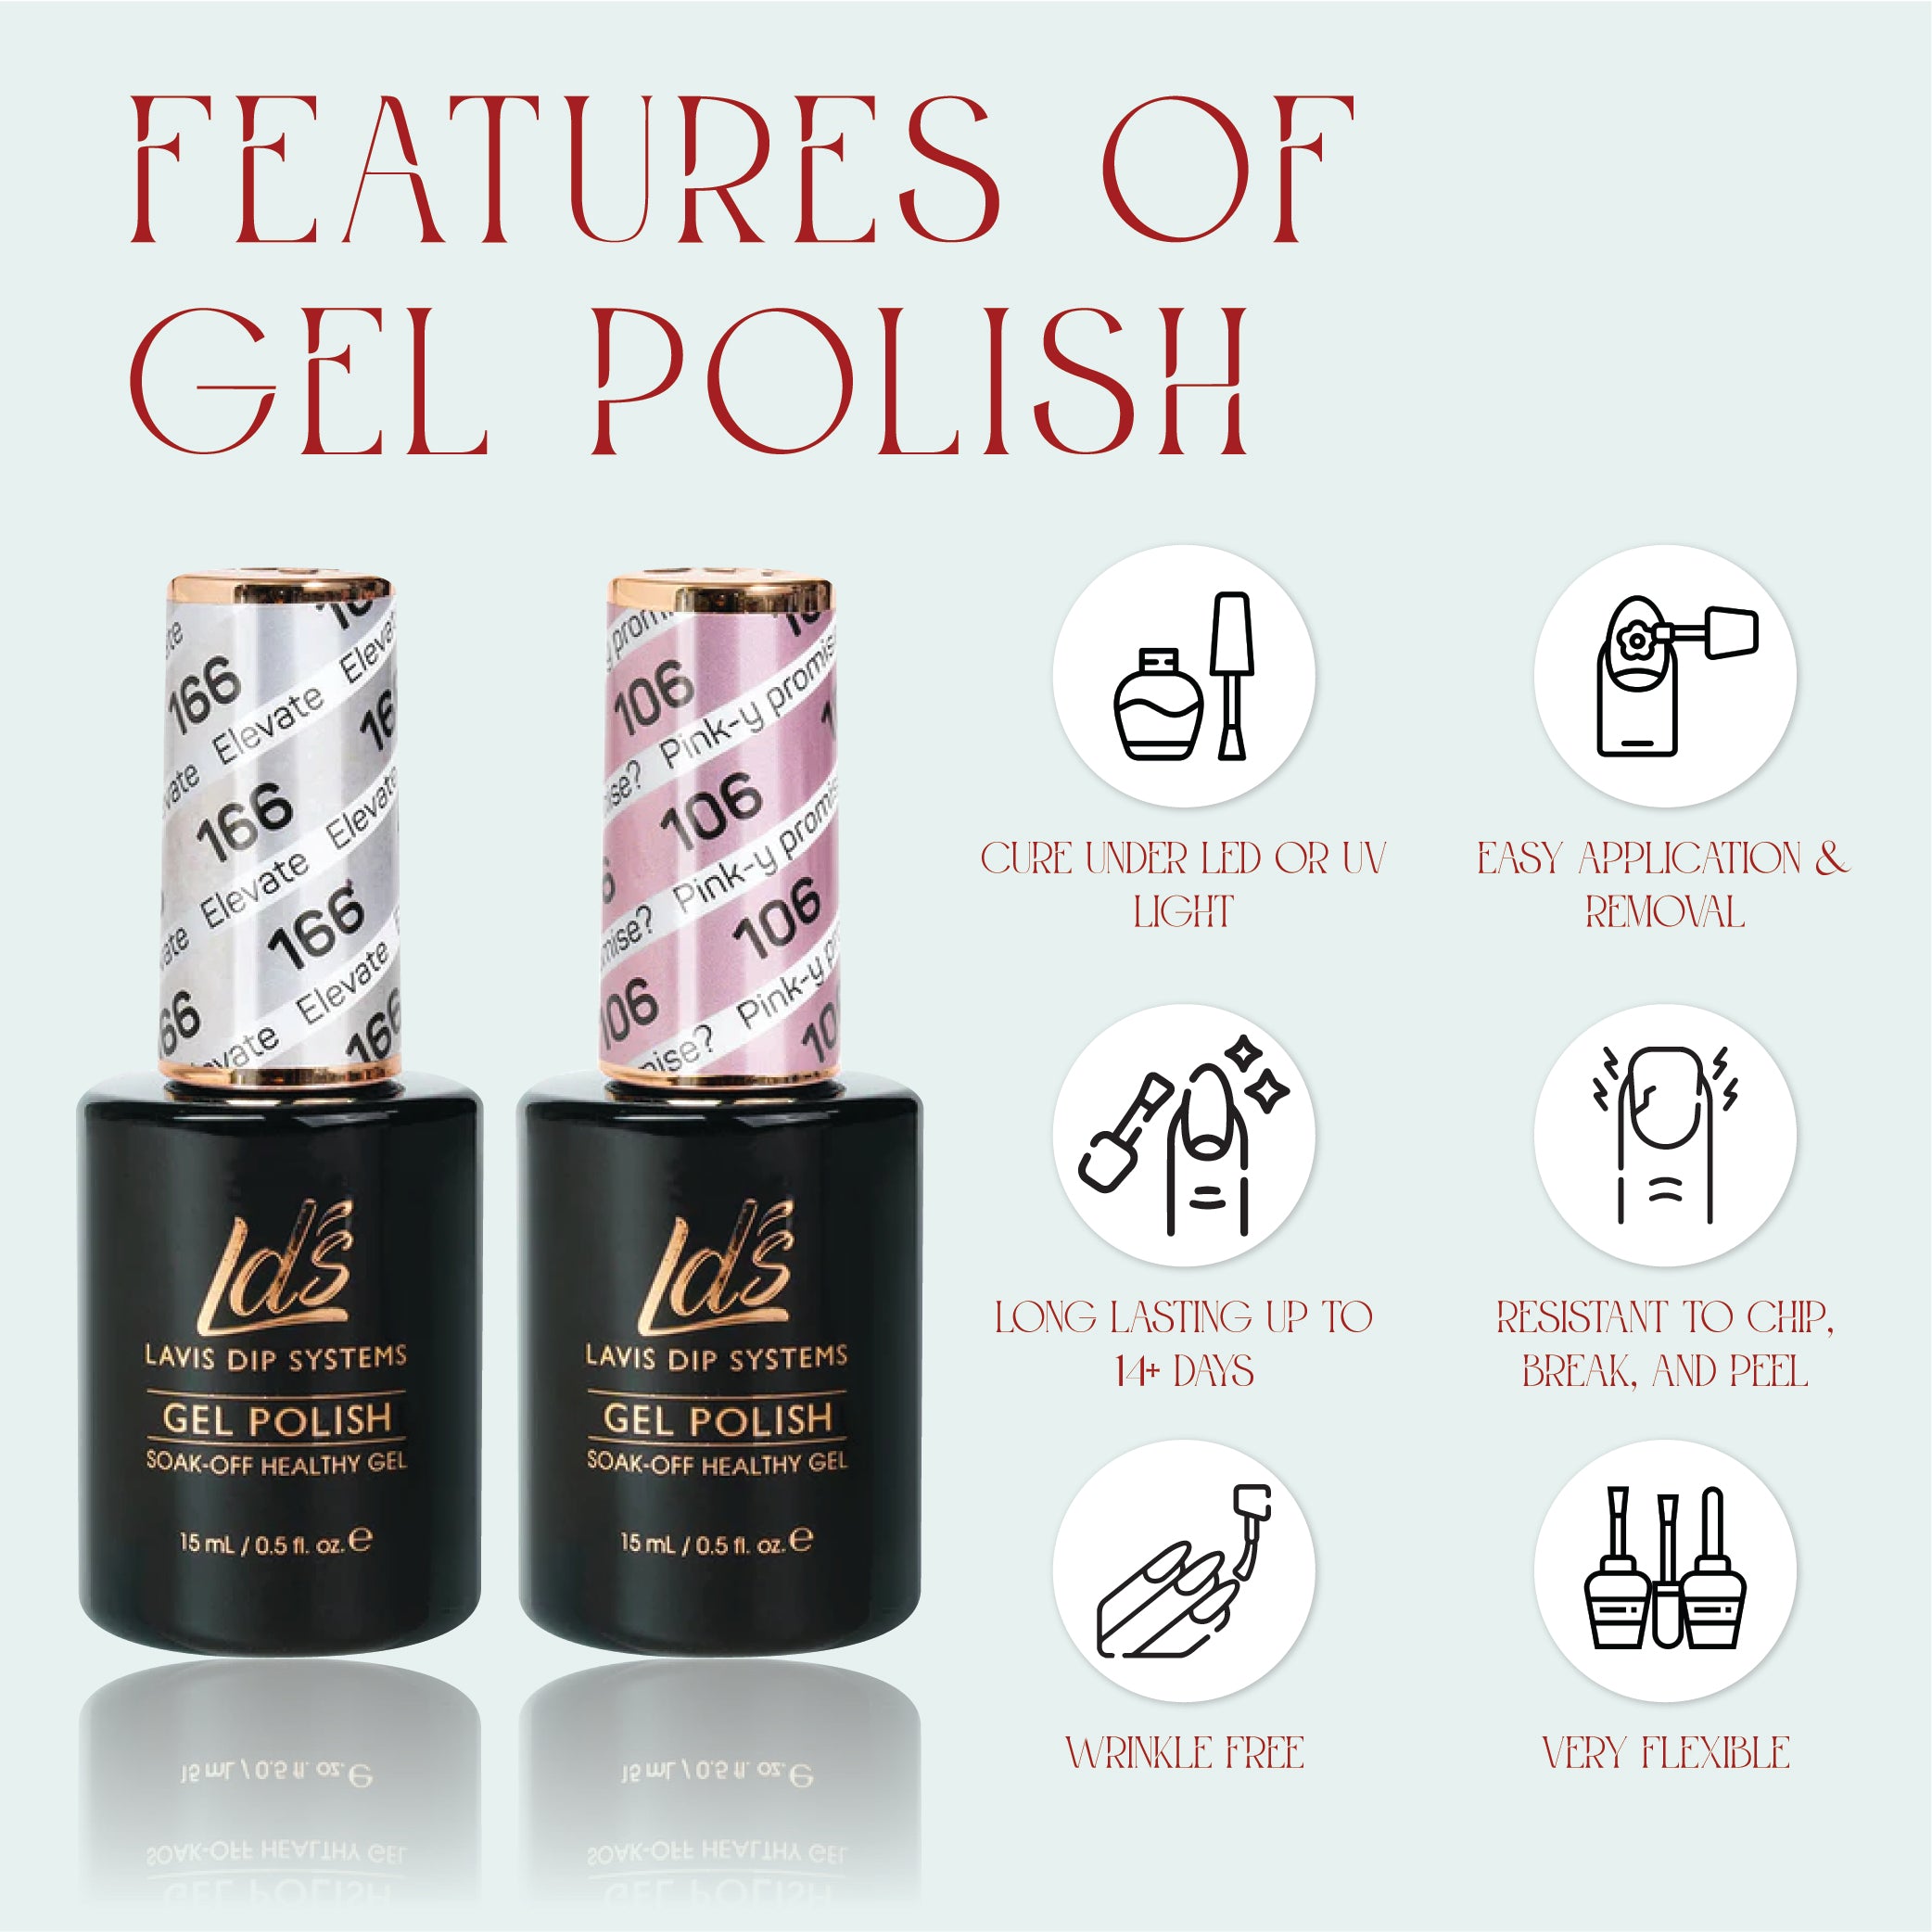 LDS Gel Nail Polish Duo - 132 Blue Colors - Escape The Ordinary